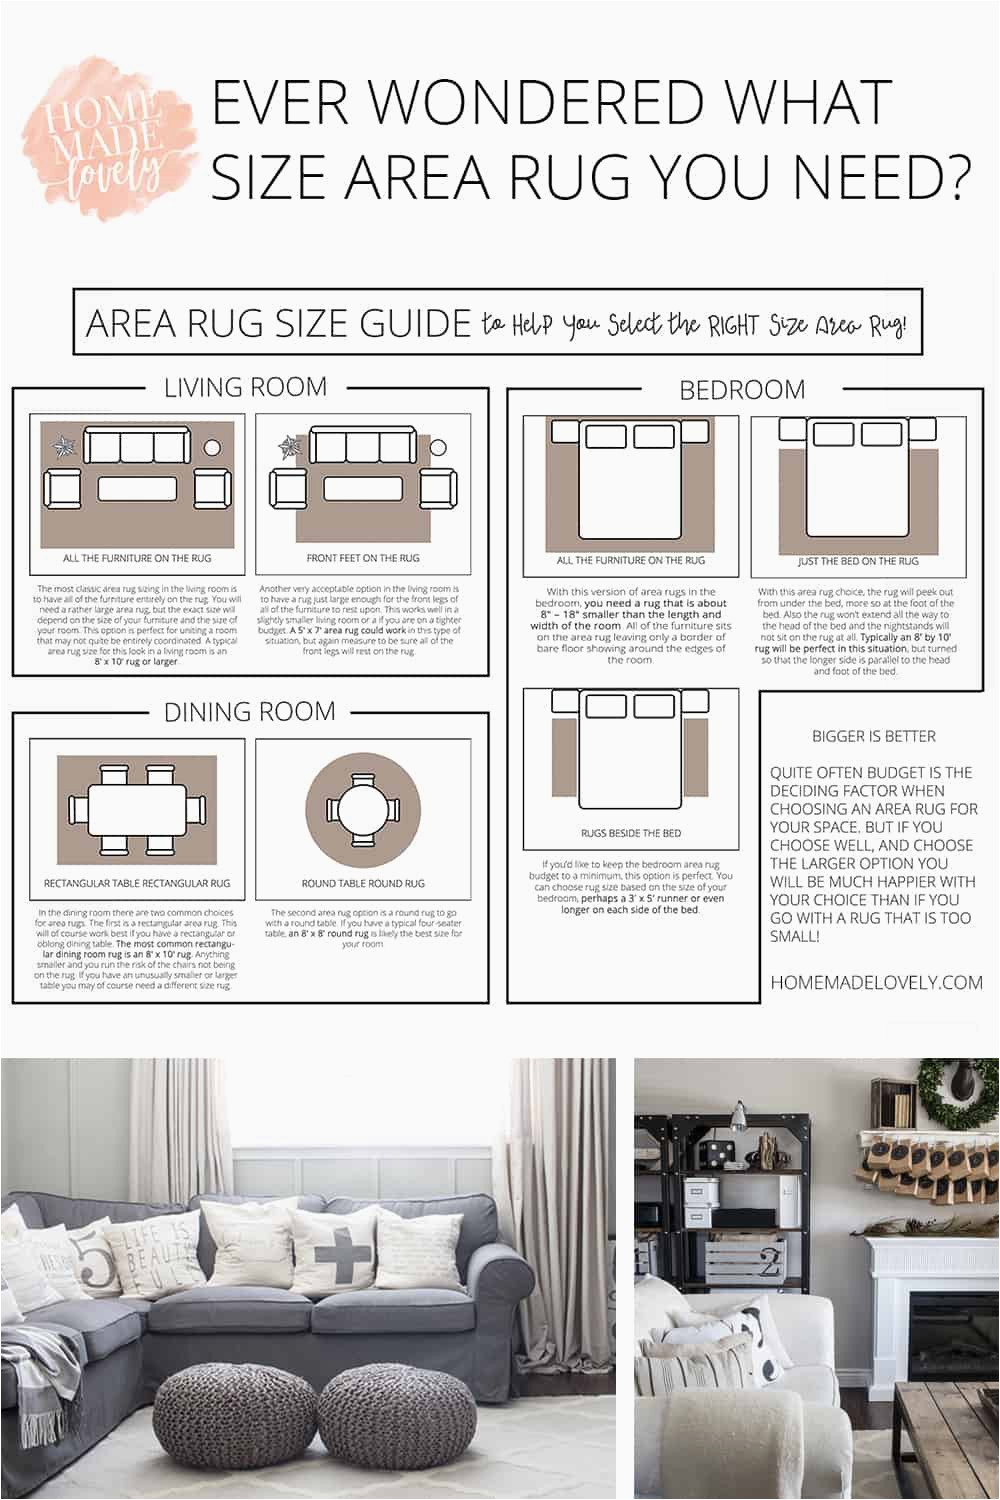 Choosing An area Rug Size area Rug Size Guide to Help You Select the Right Size area Rug